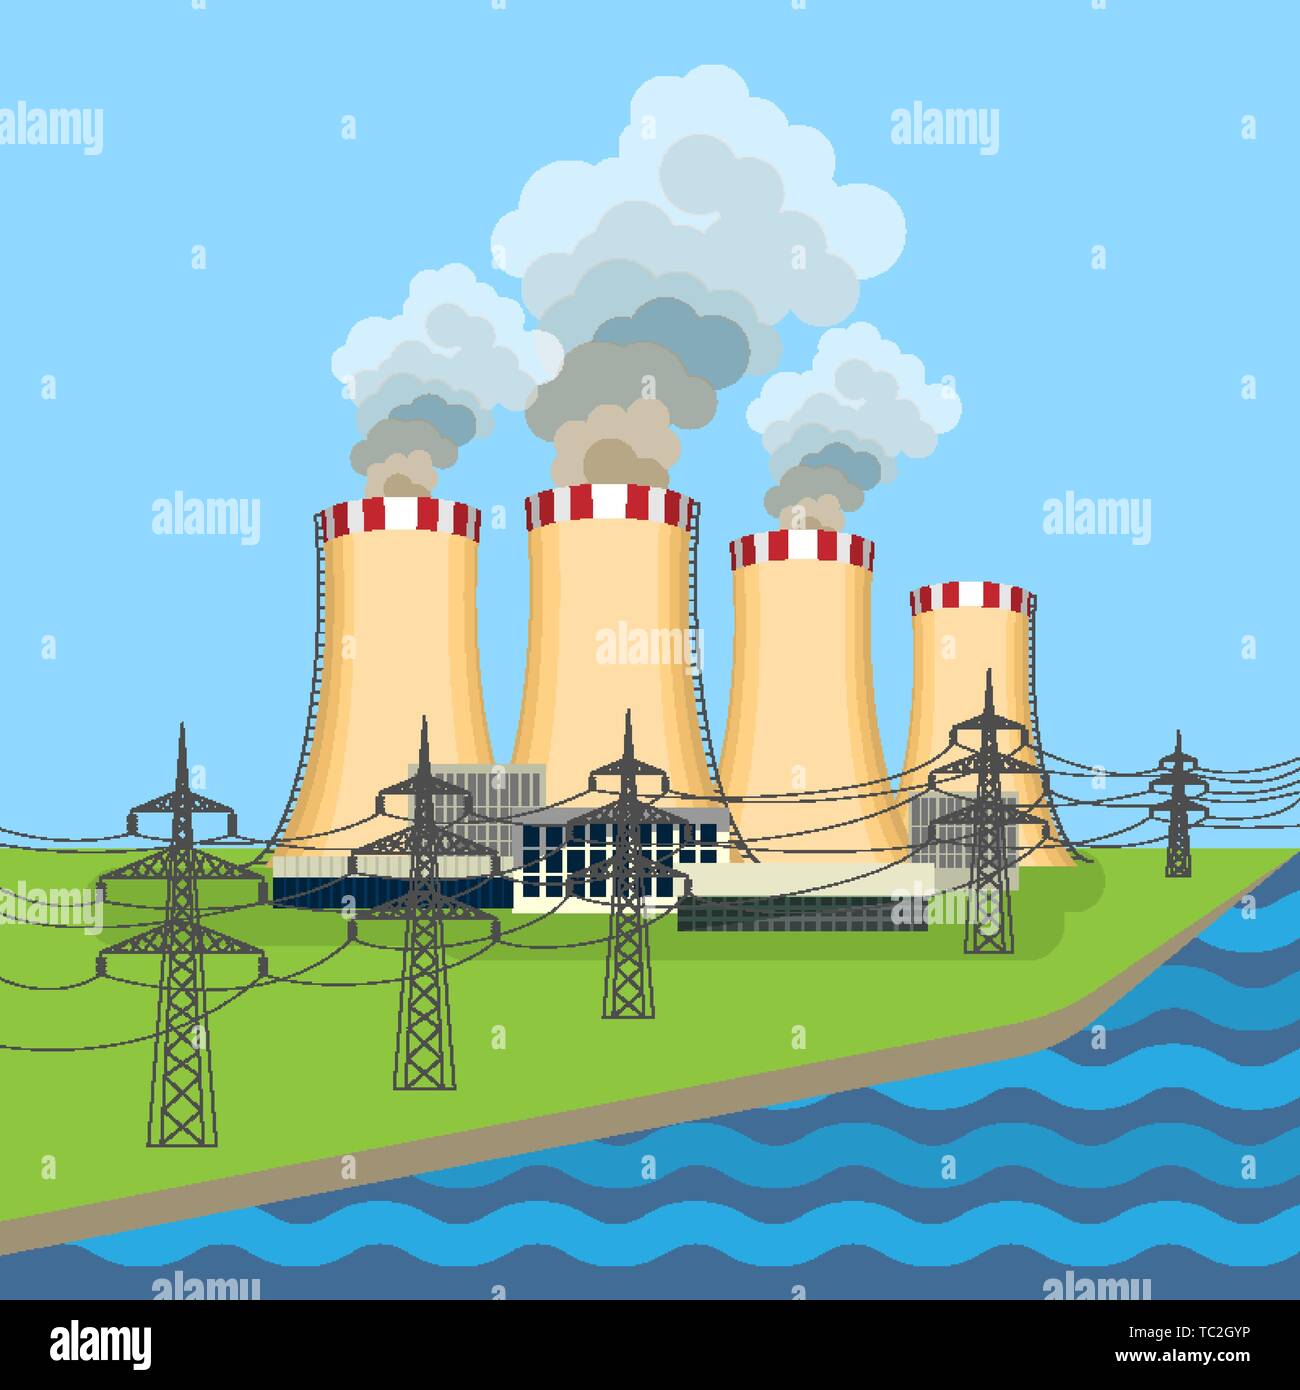 Working nuclear power plant near set of connected towers along flowing blue. Vector illustration of dangerous for environment and people anatomic nucl Stock Vector